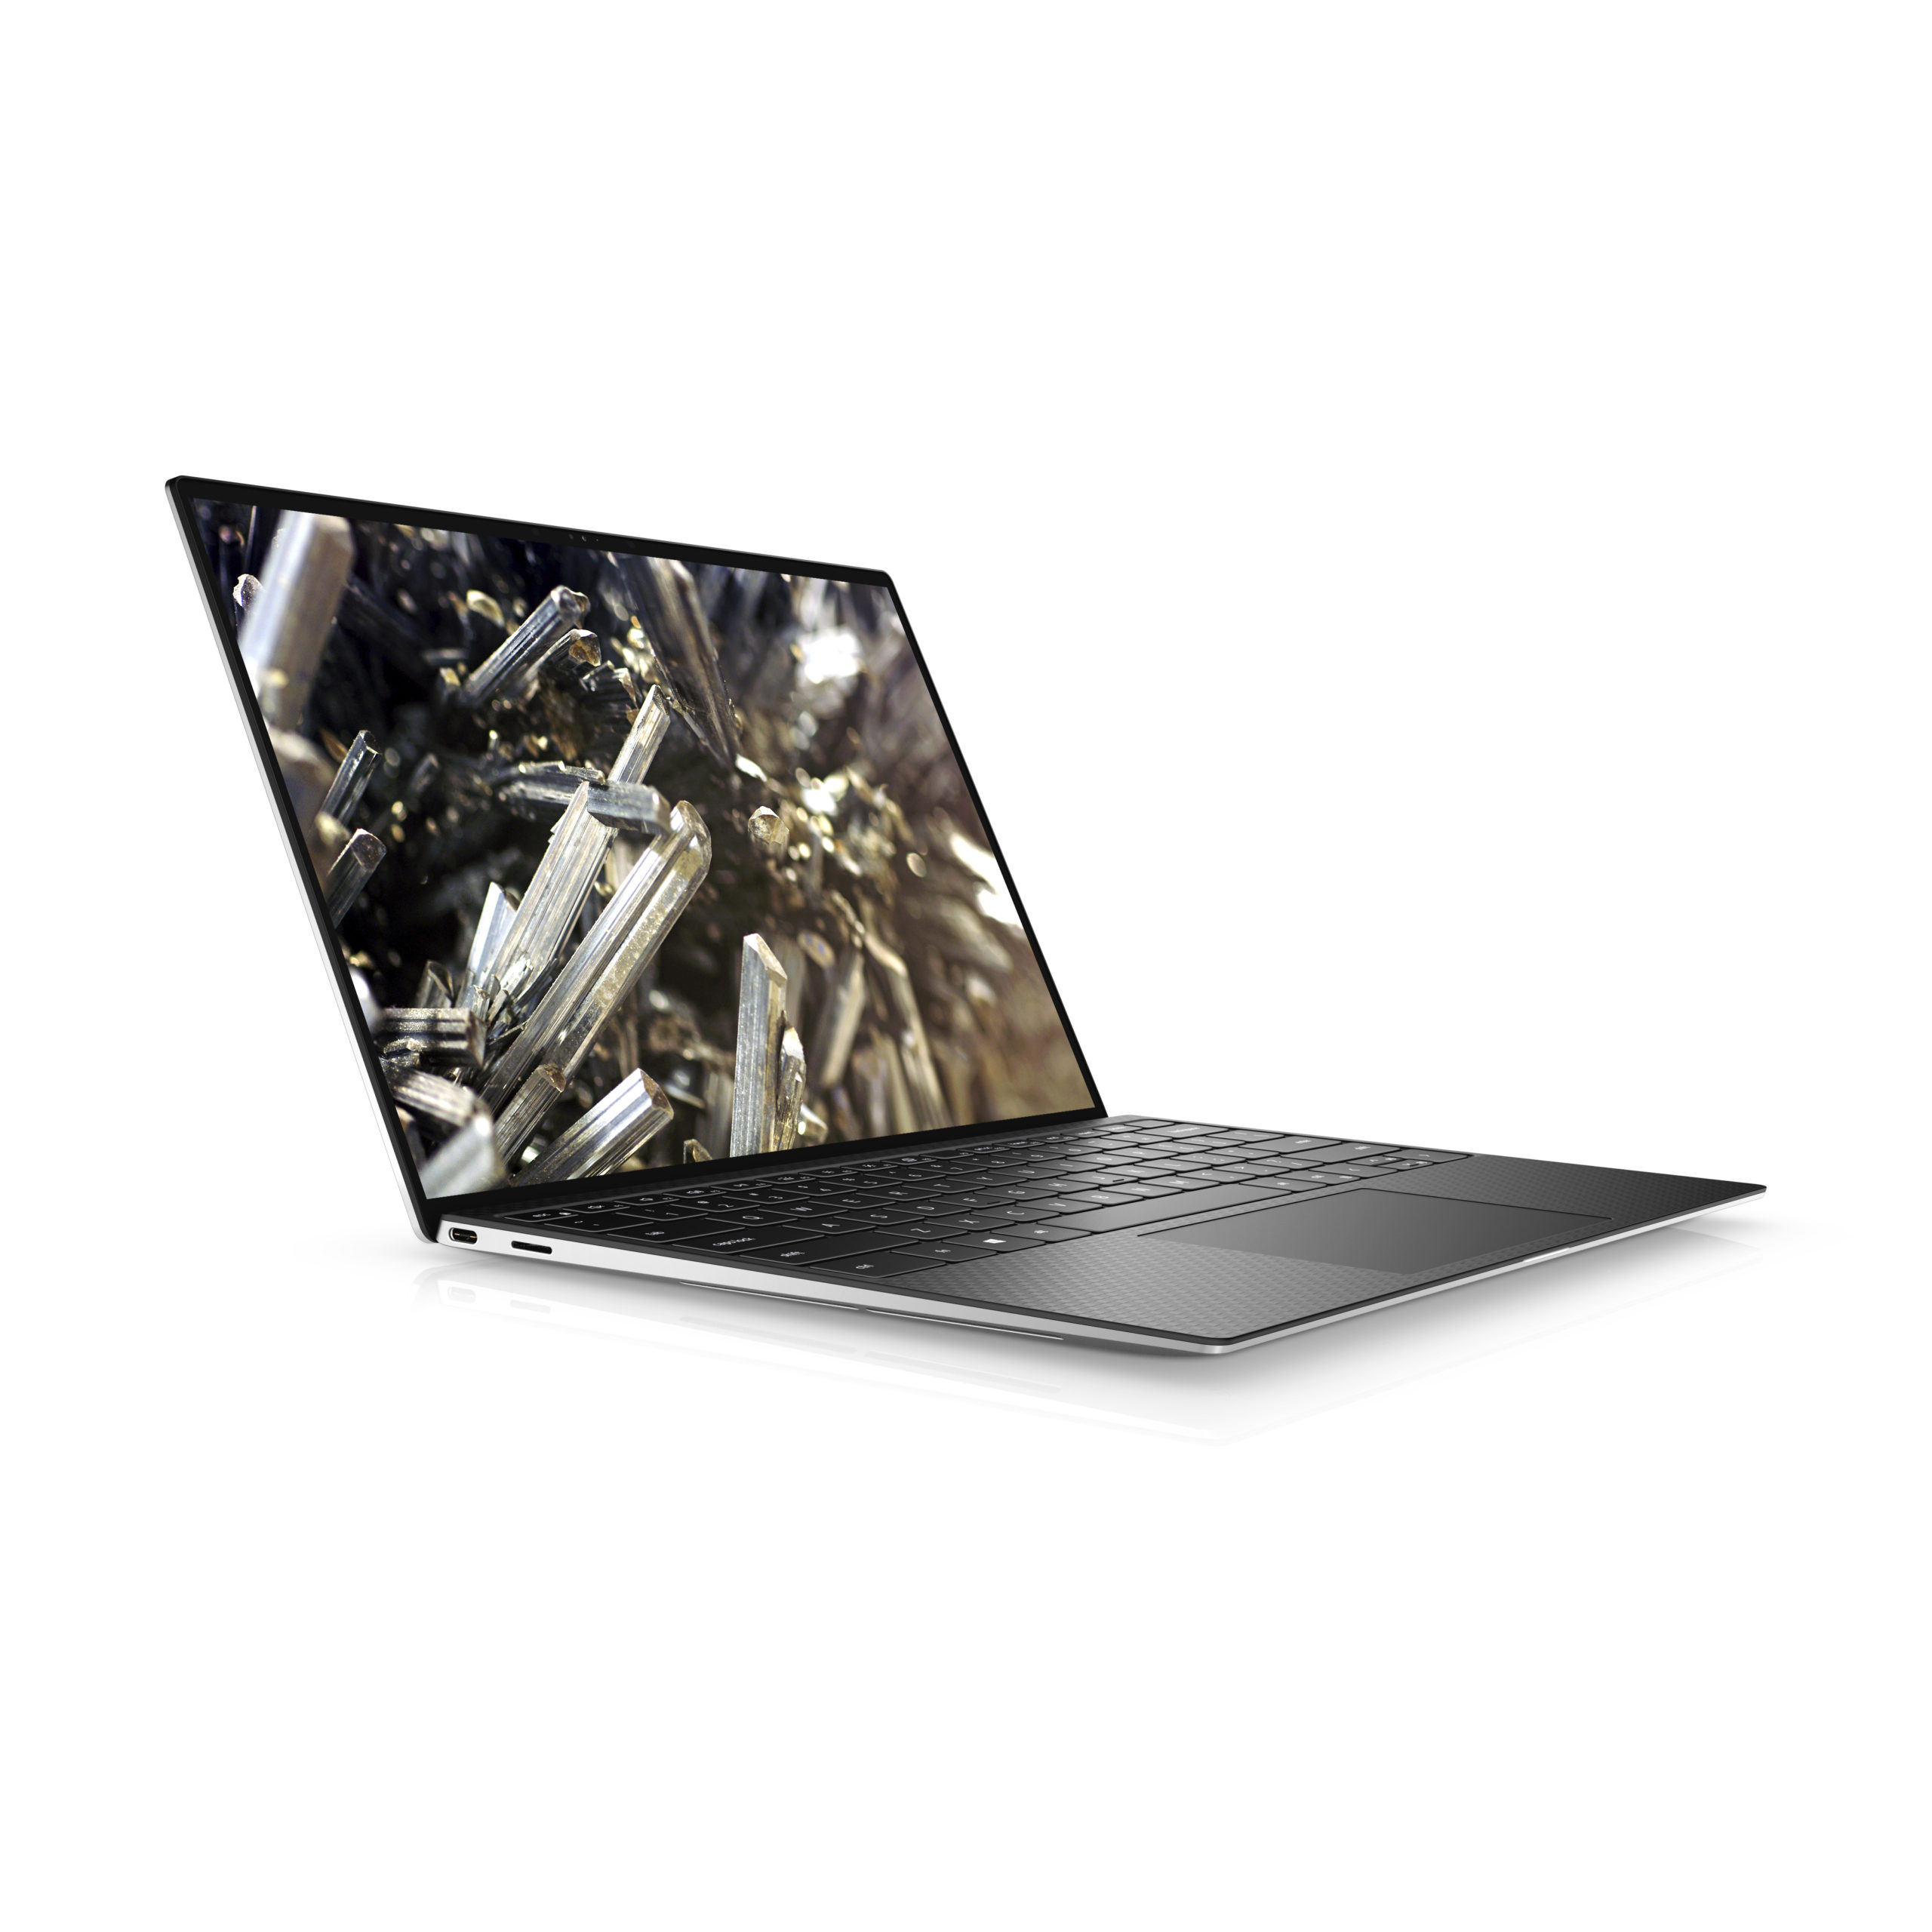 Dell updates the XPS 13 laptop and 2-in-1 to Intel Tiger Lake silicon